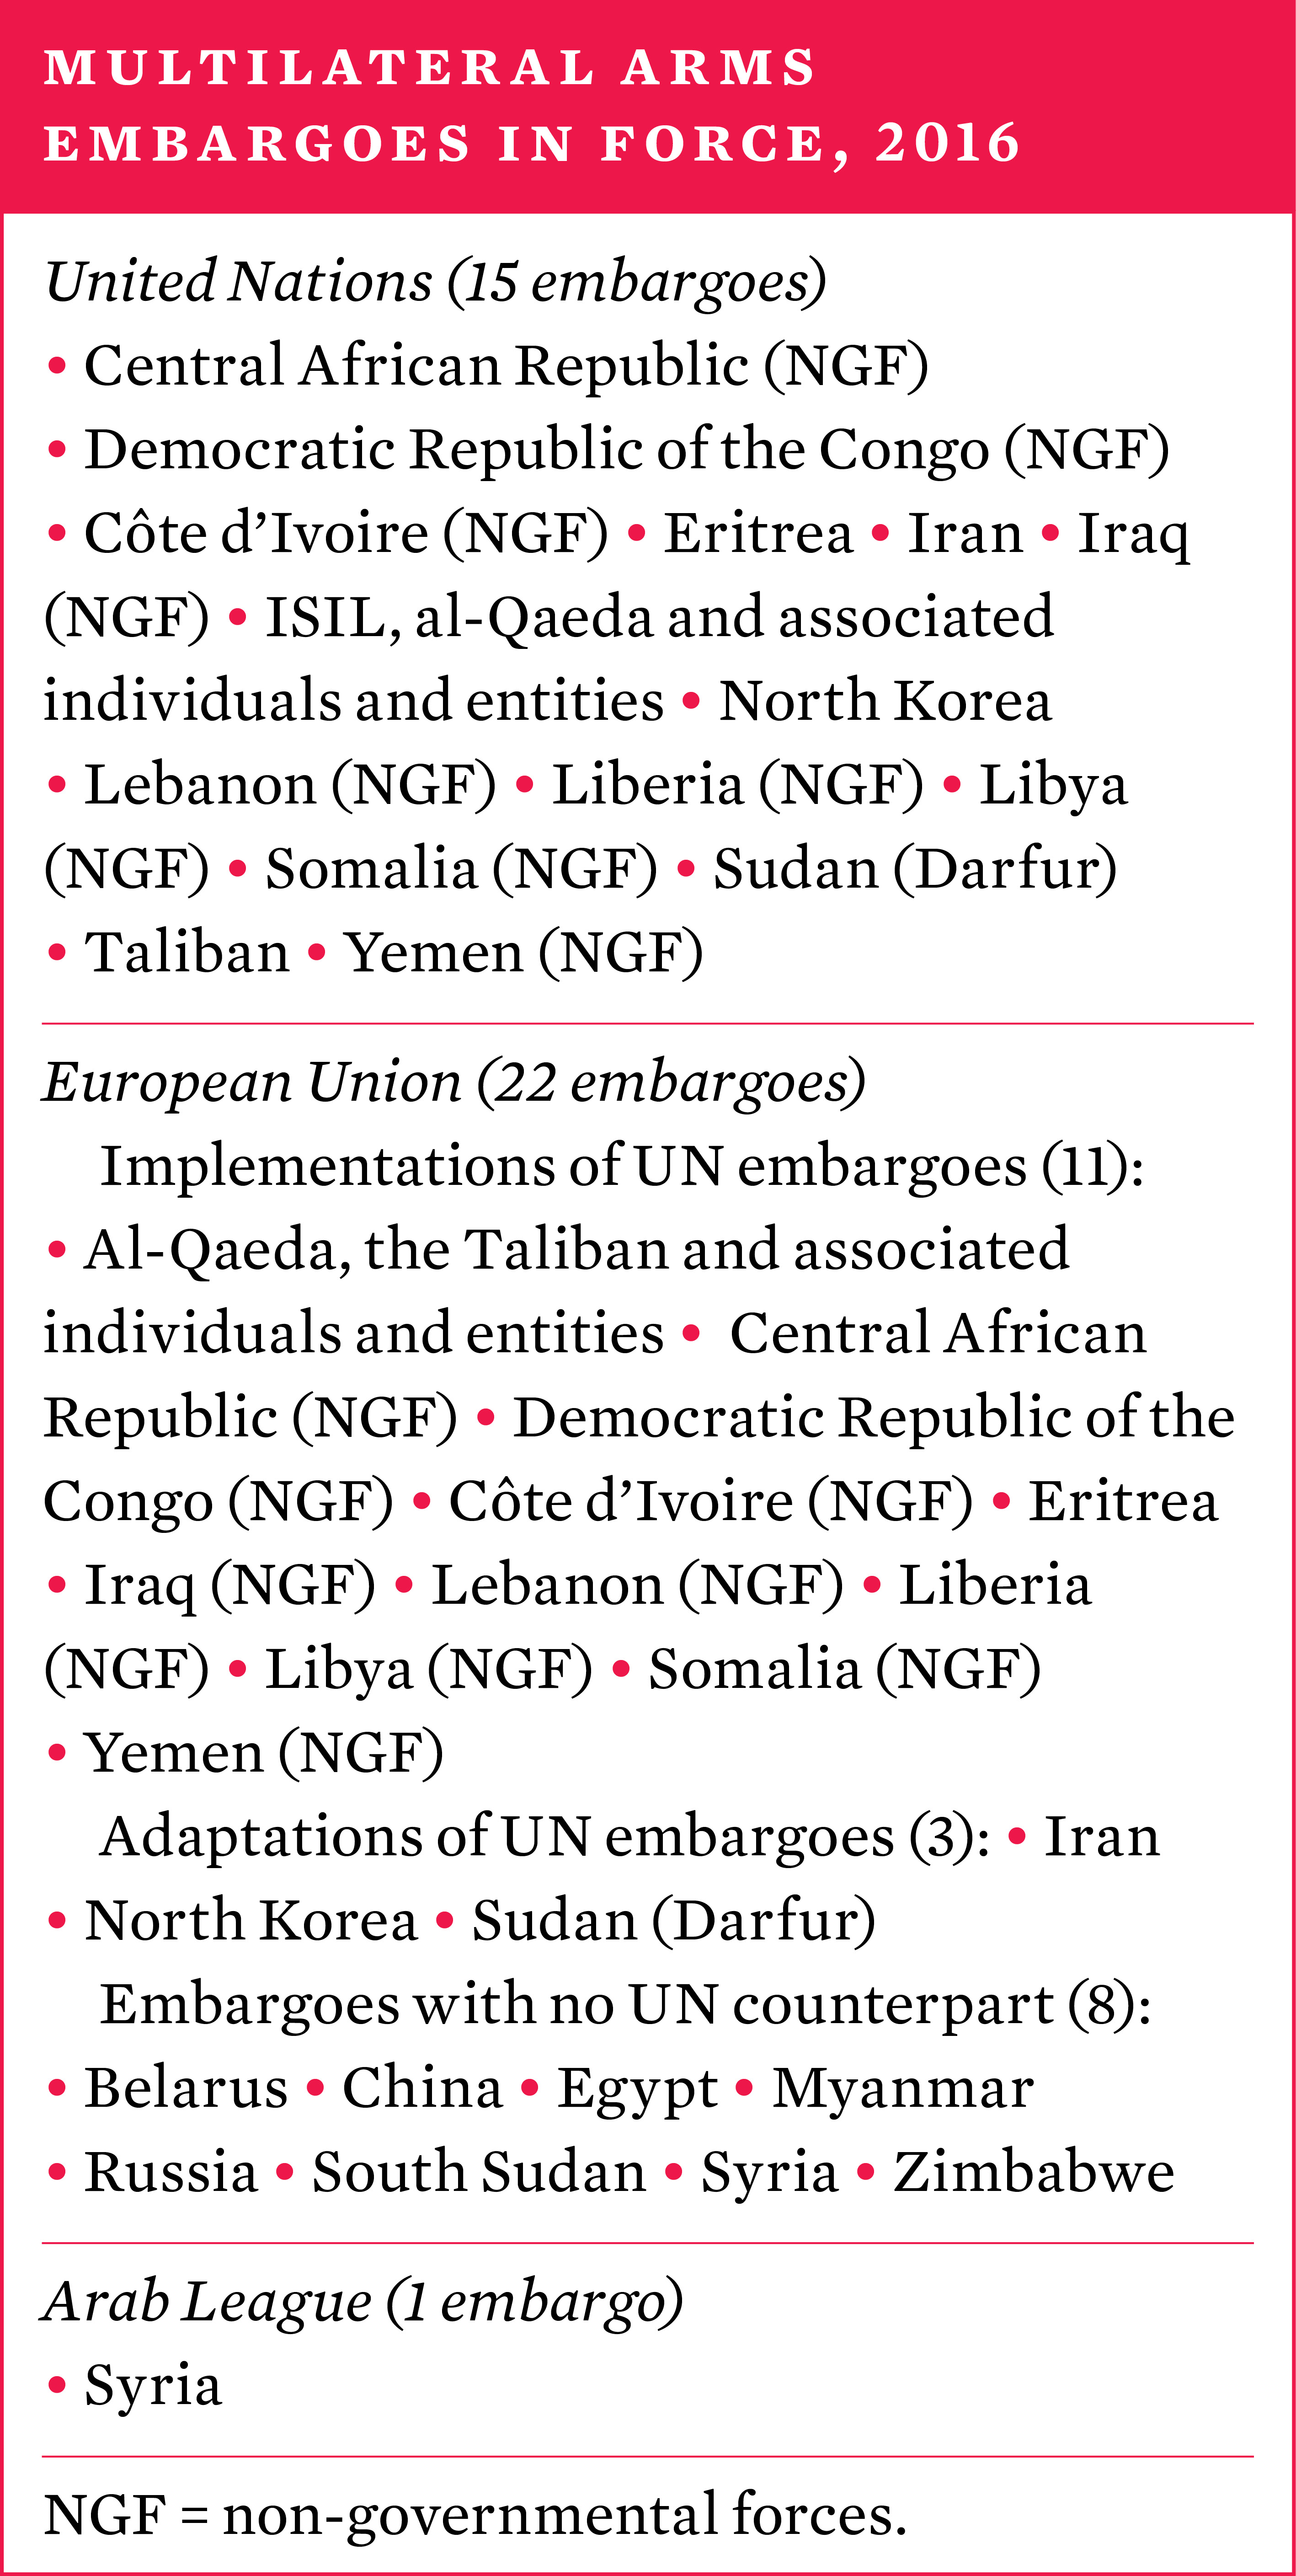 Multilateral arms embargoes in force, 2016